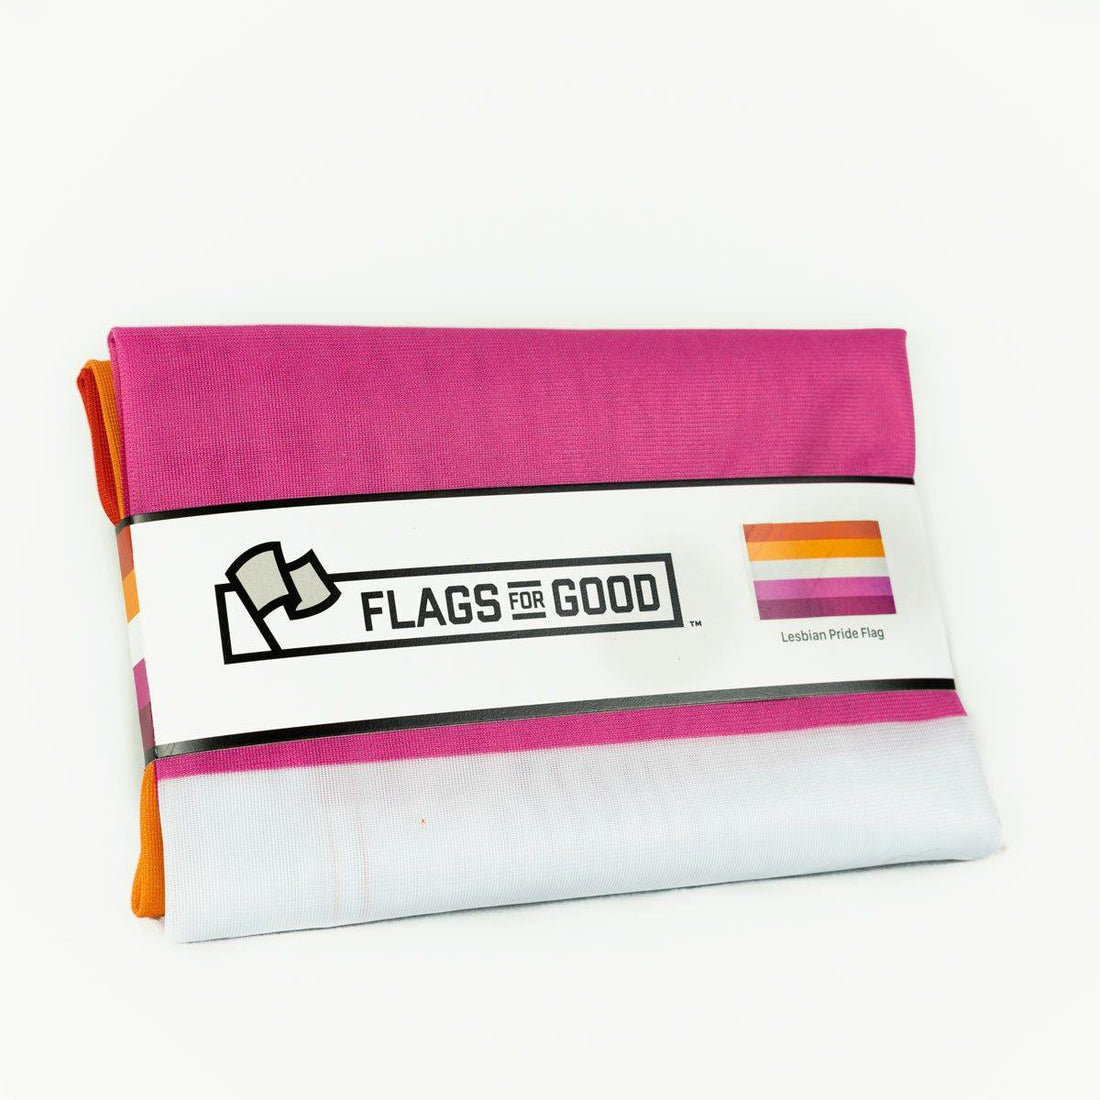 Lesbian Pride Flag | $1 Donated to LGBTQ+ Organizations – Flags For Good